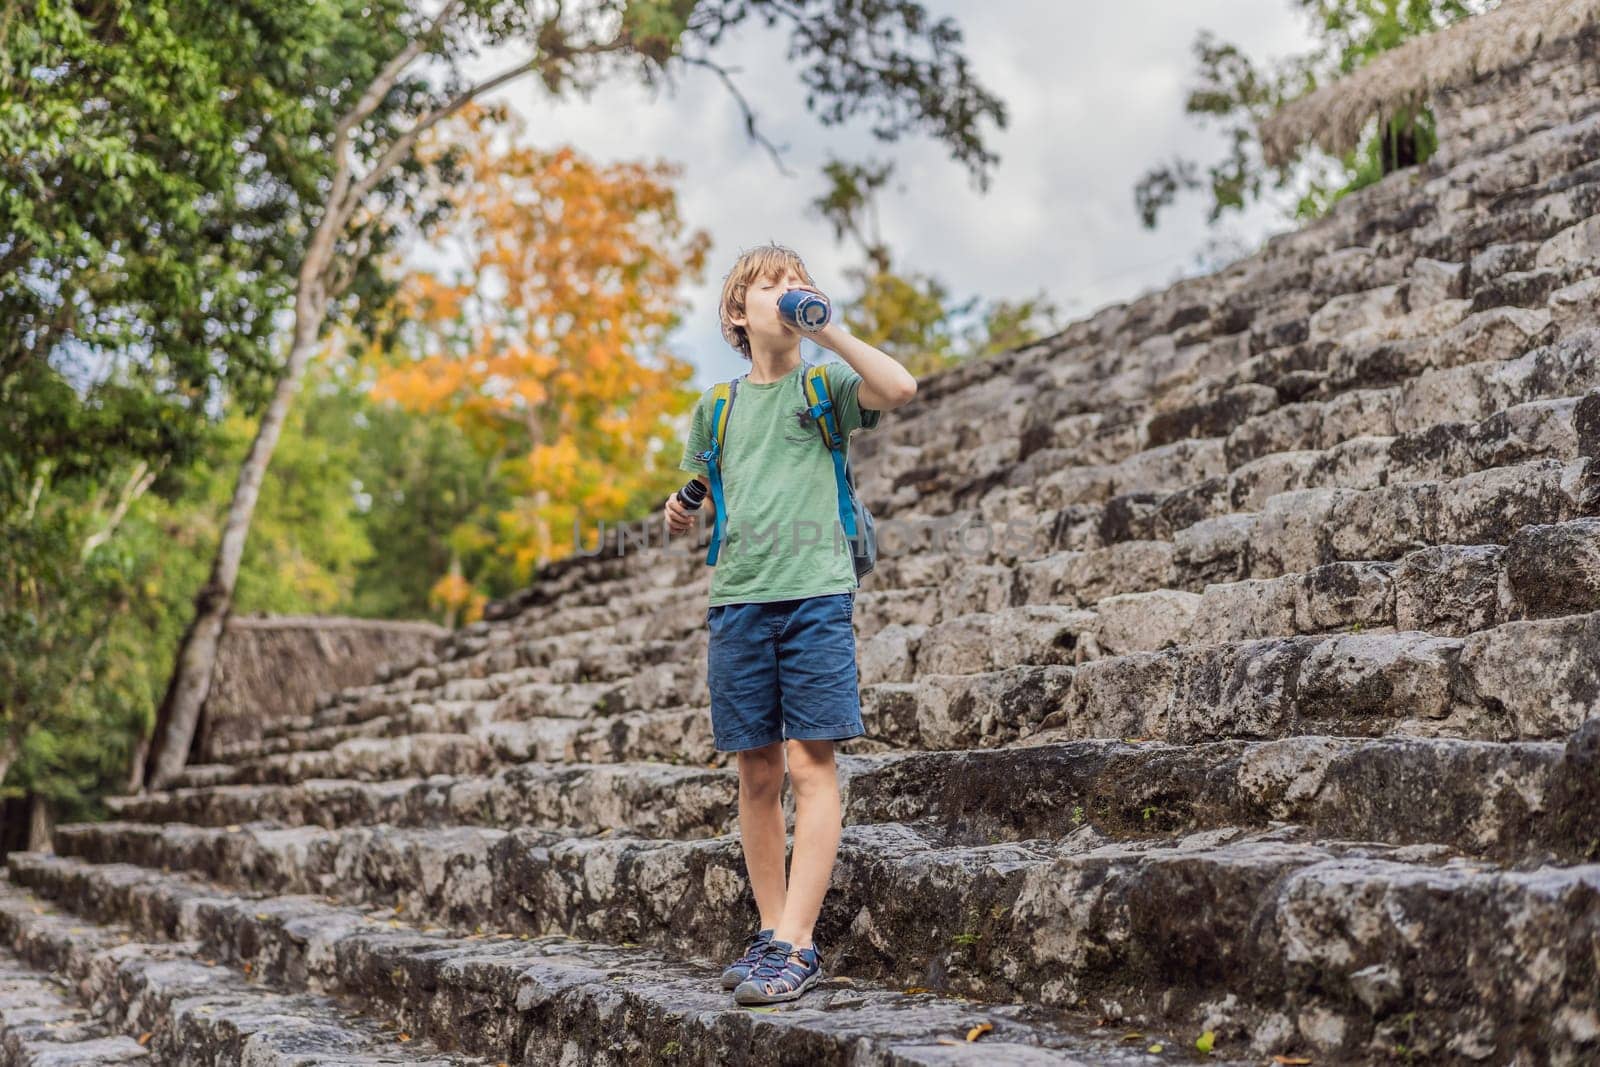 Boy tourist at Coba, Mexico. Ancient mayan city in Mexico. Coba is an archaeological area and a famous landmark of Yucatan Peninsula. Cloudy sky over a pyramid in Mexico.